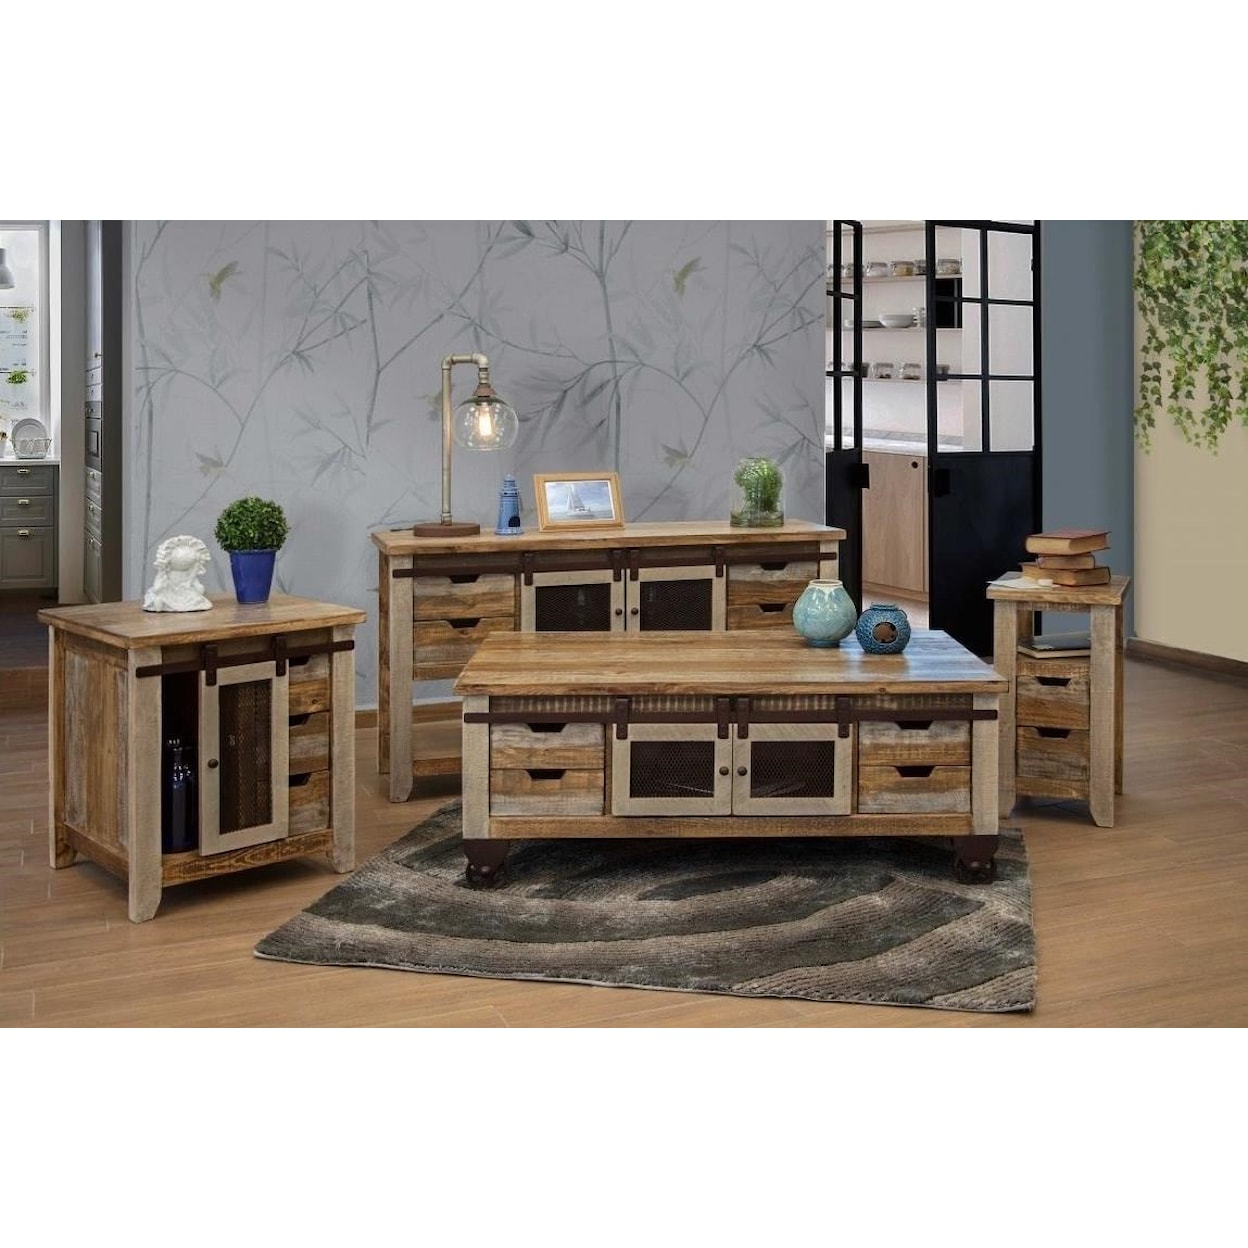 IFD International Furniture Direct 900 Antique Cocktail Table with 4 Doors and 8 Drawers